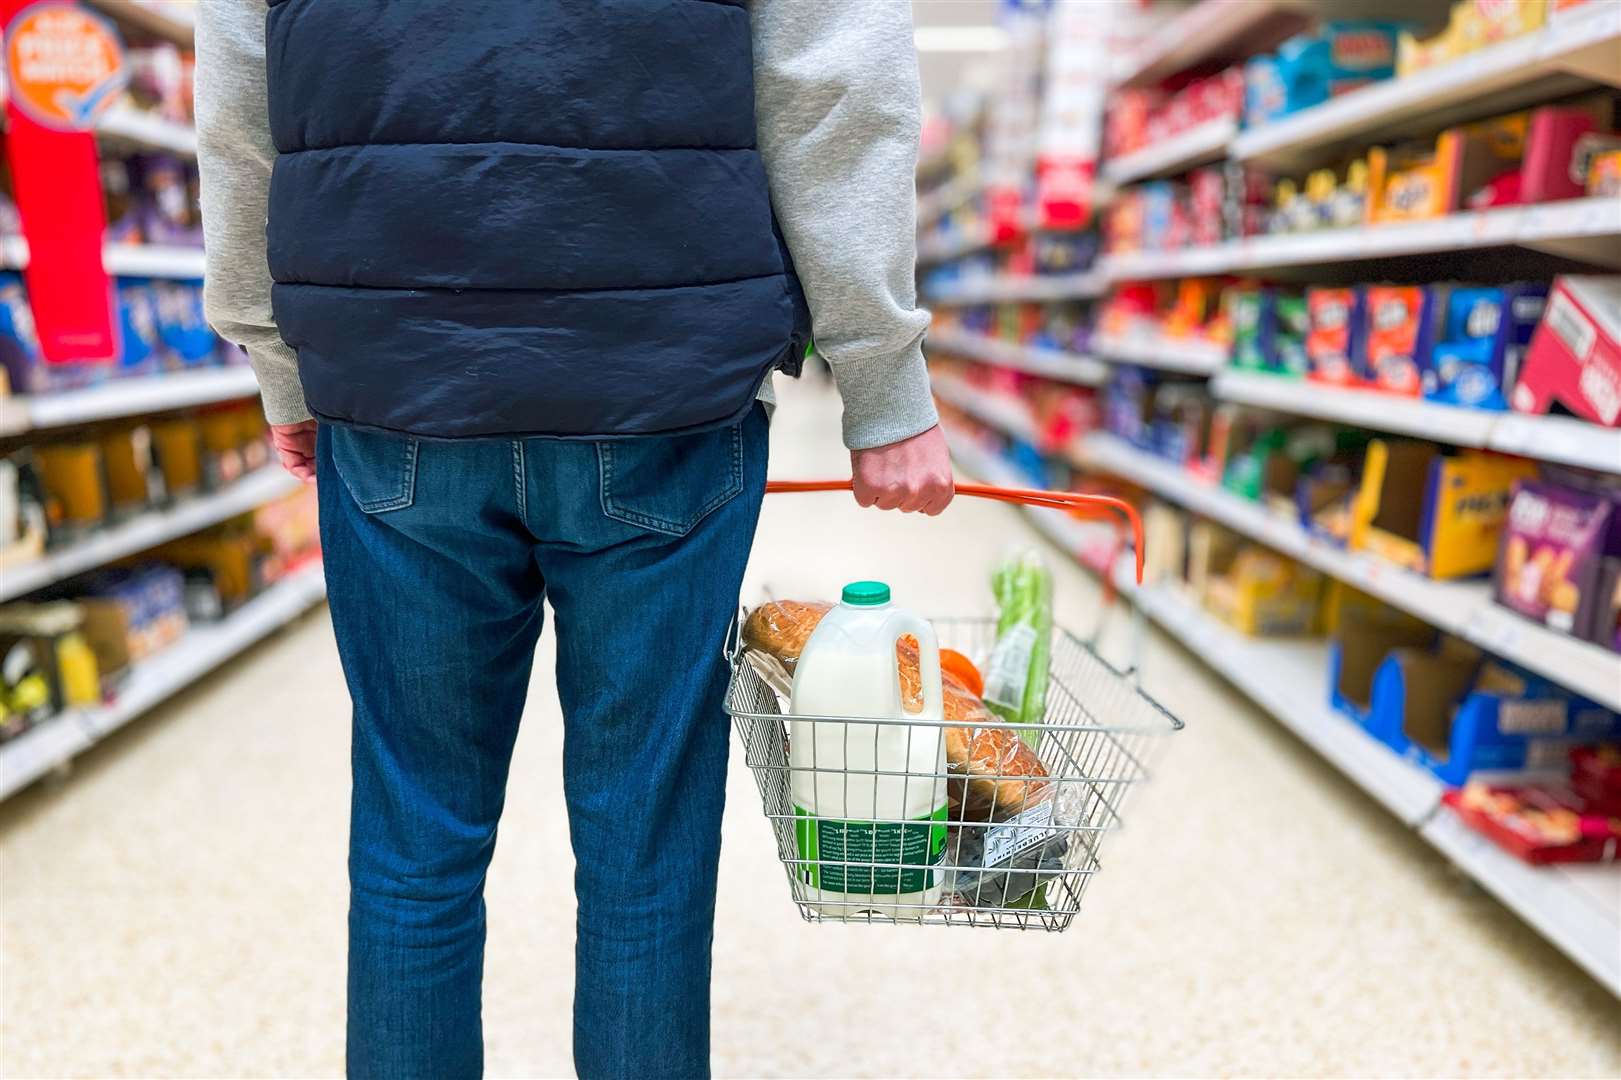 Shoppers say they had been scouring the aisles for the crisps. Image: iStock.